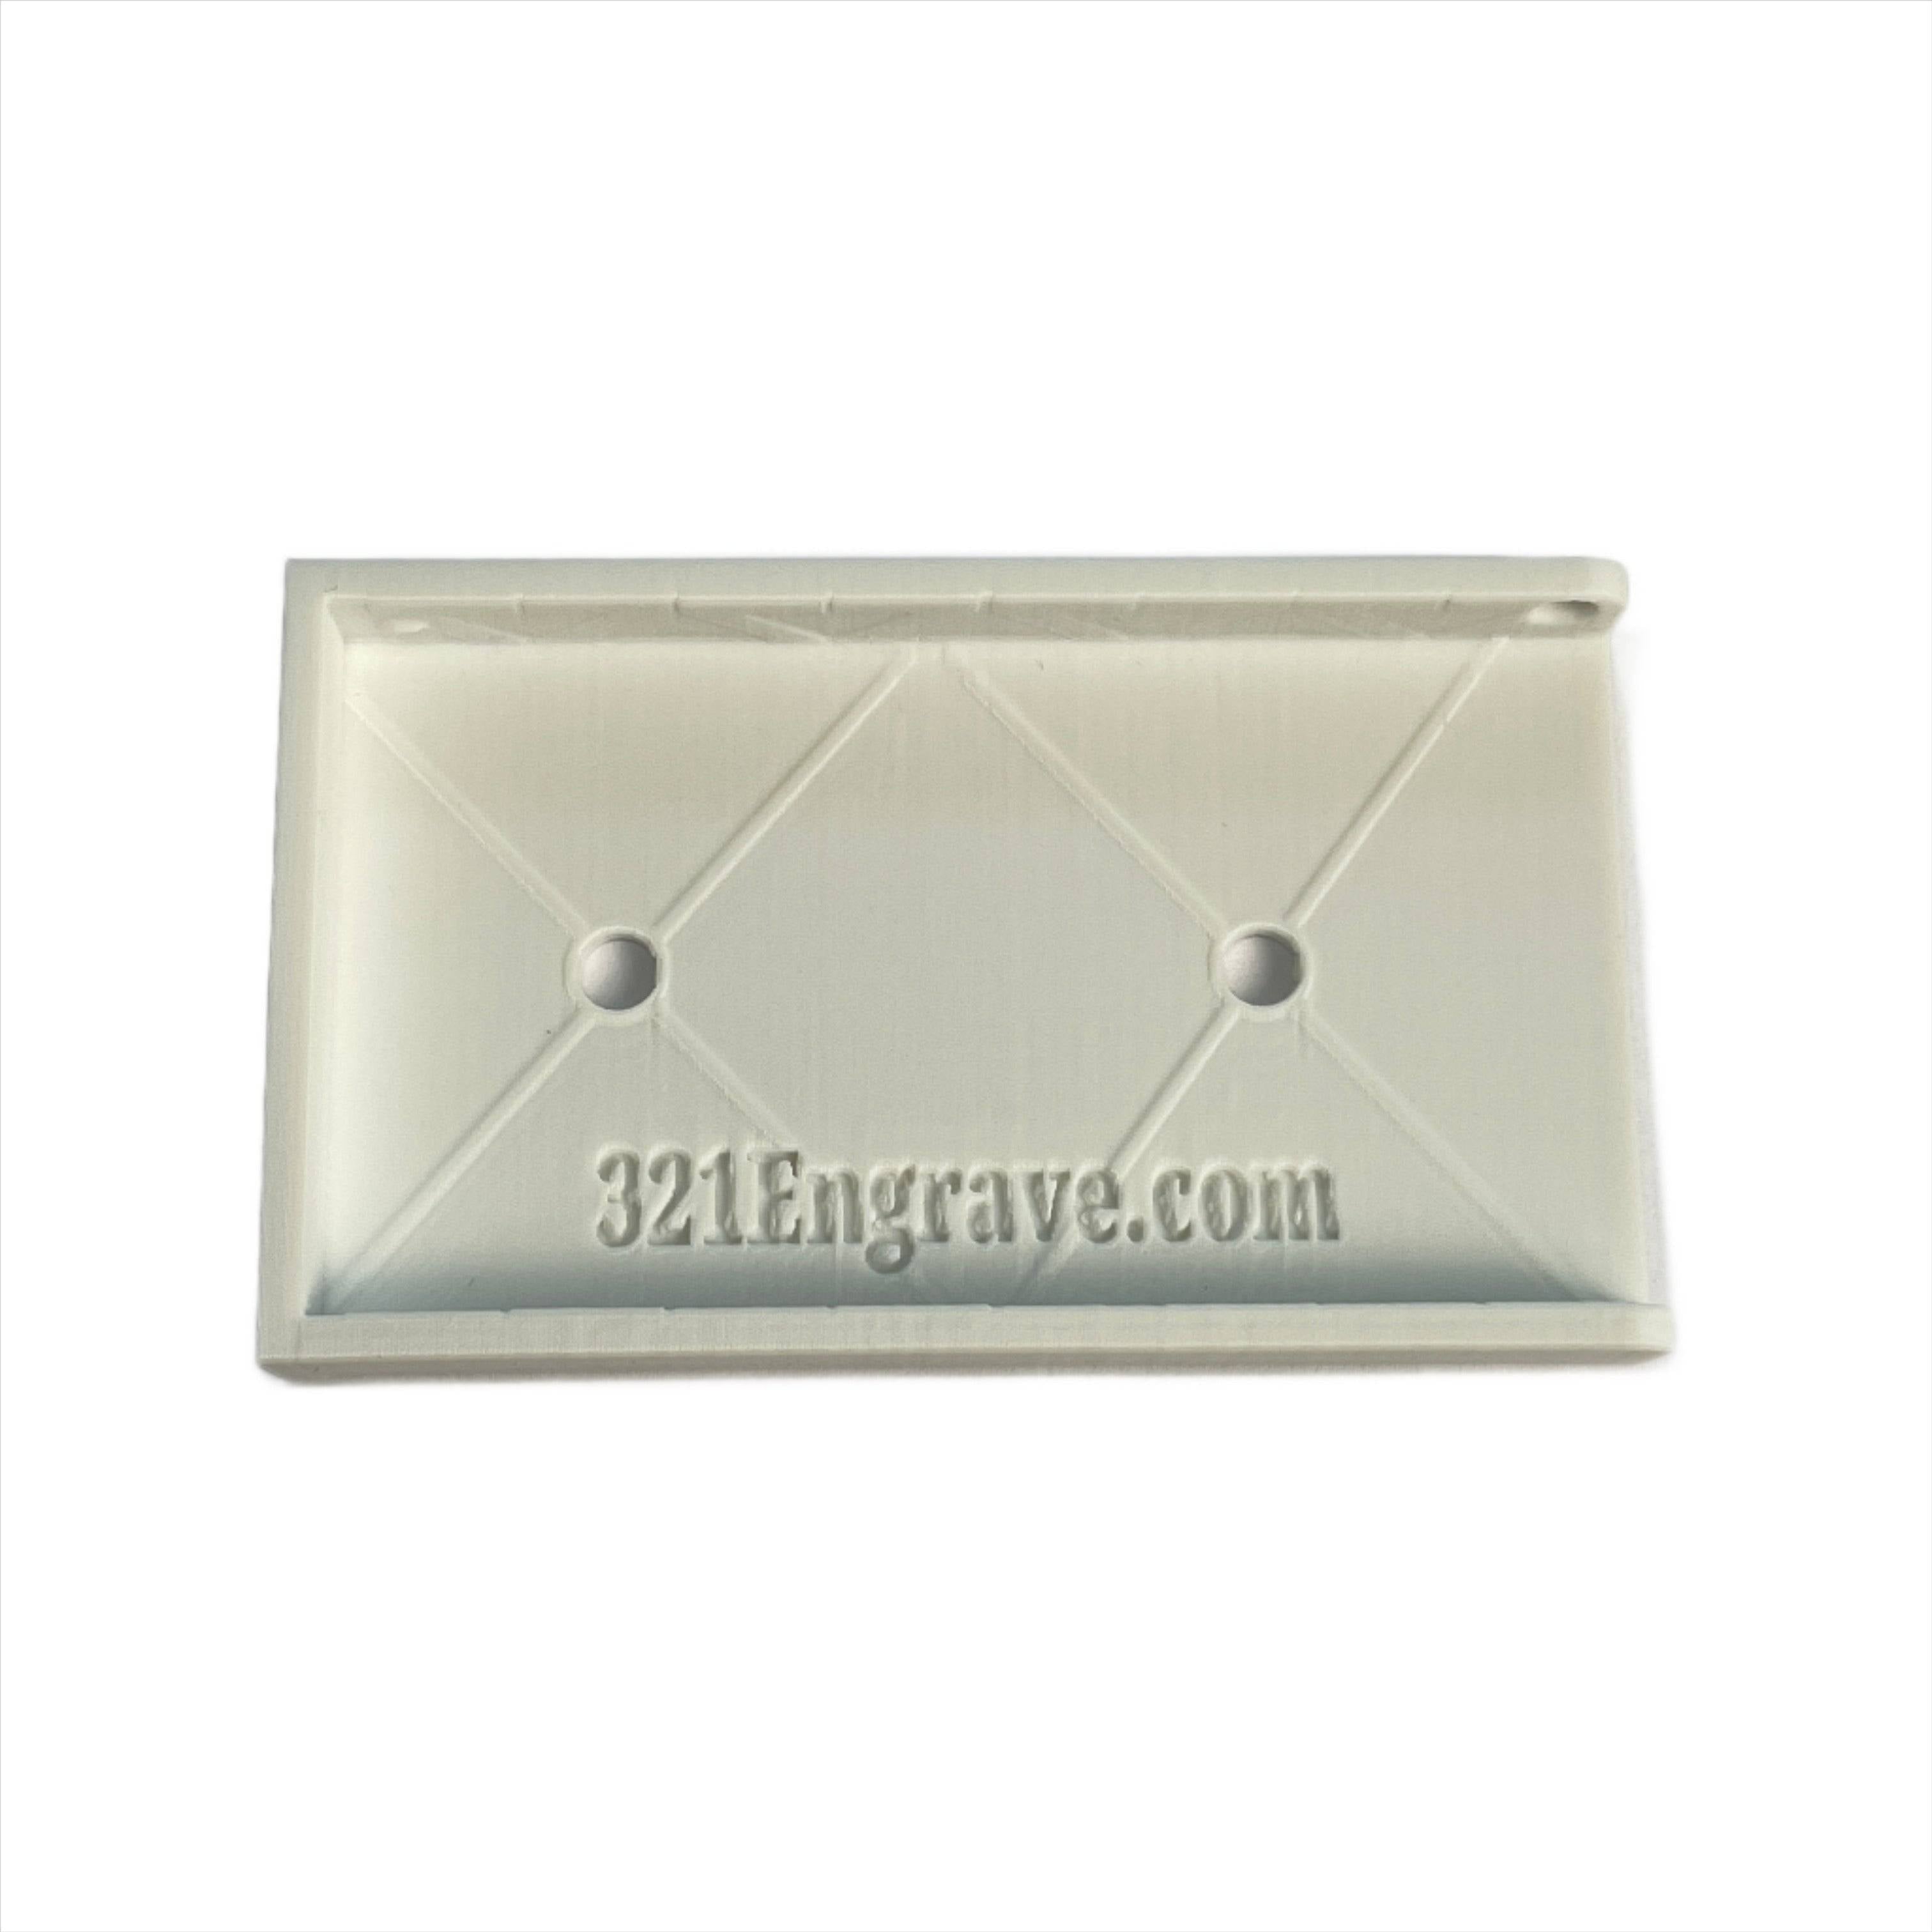 Use this white base plate to match or offset your mailbox flag for brick or stone mailboxes.